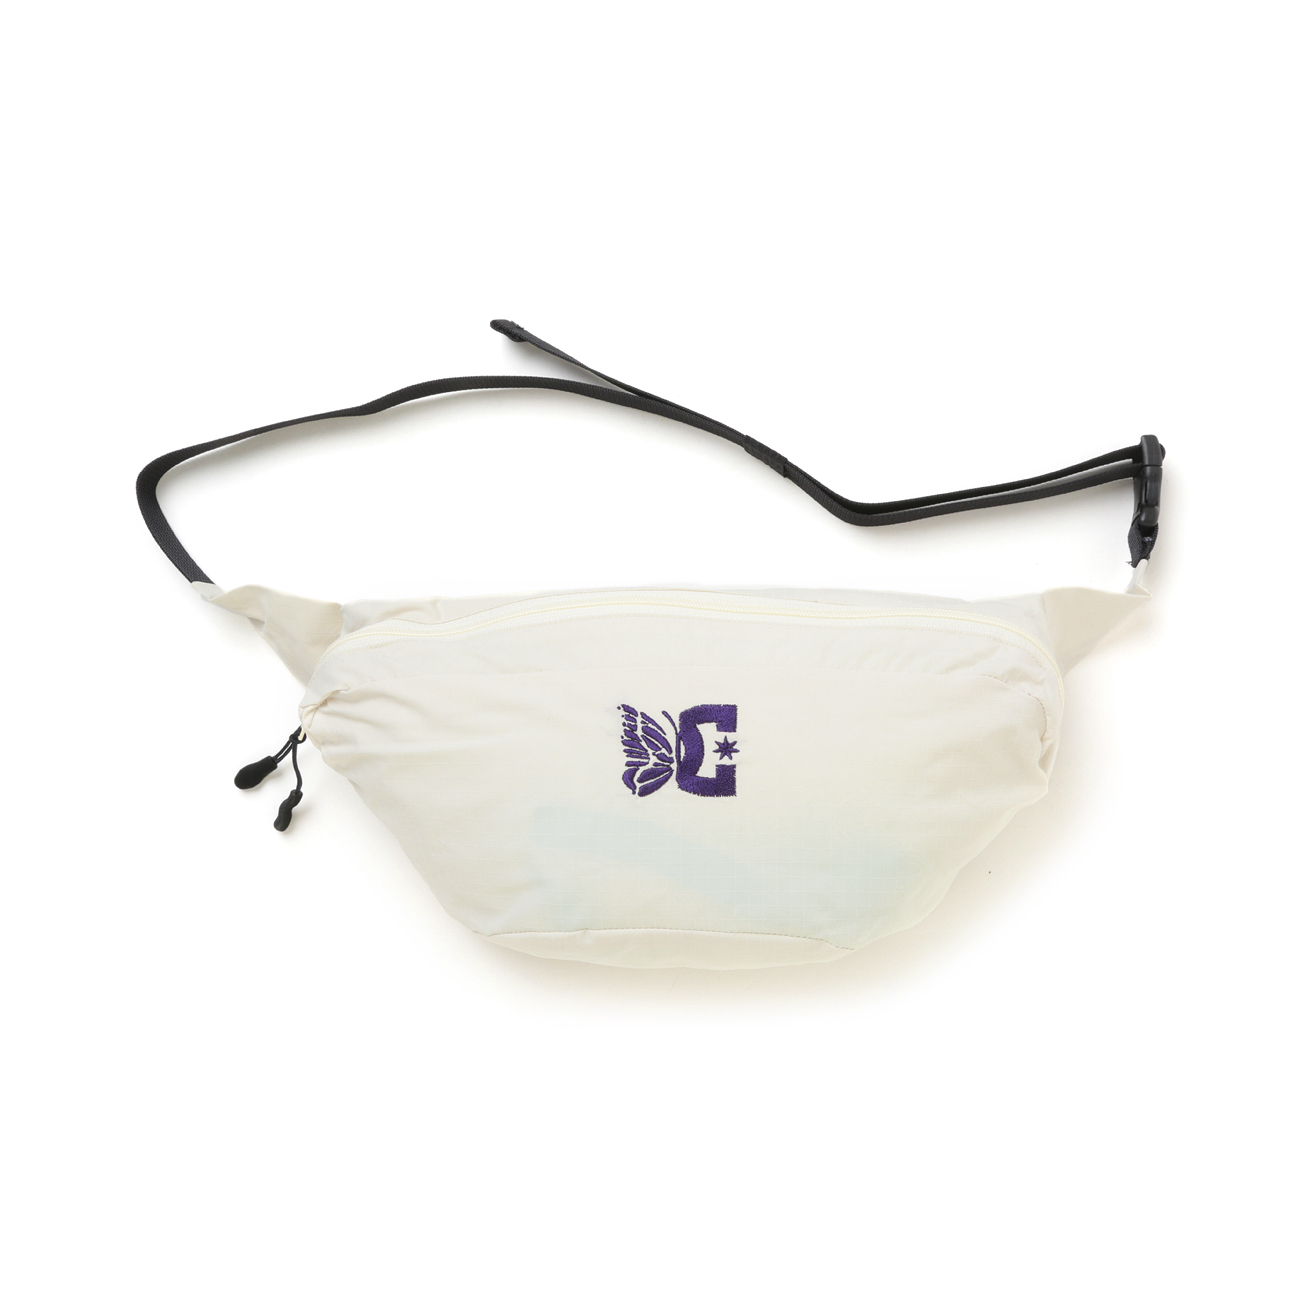 Needles × DC SHOES Hip Bag - Poly Ripstop - Ivory